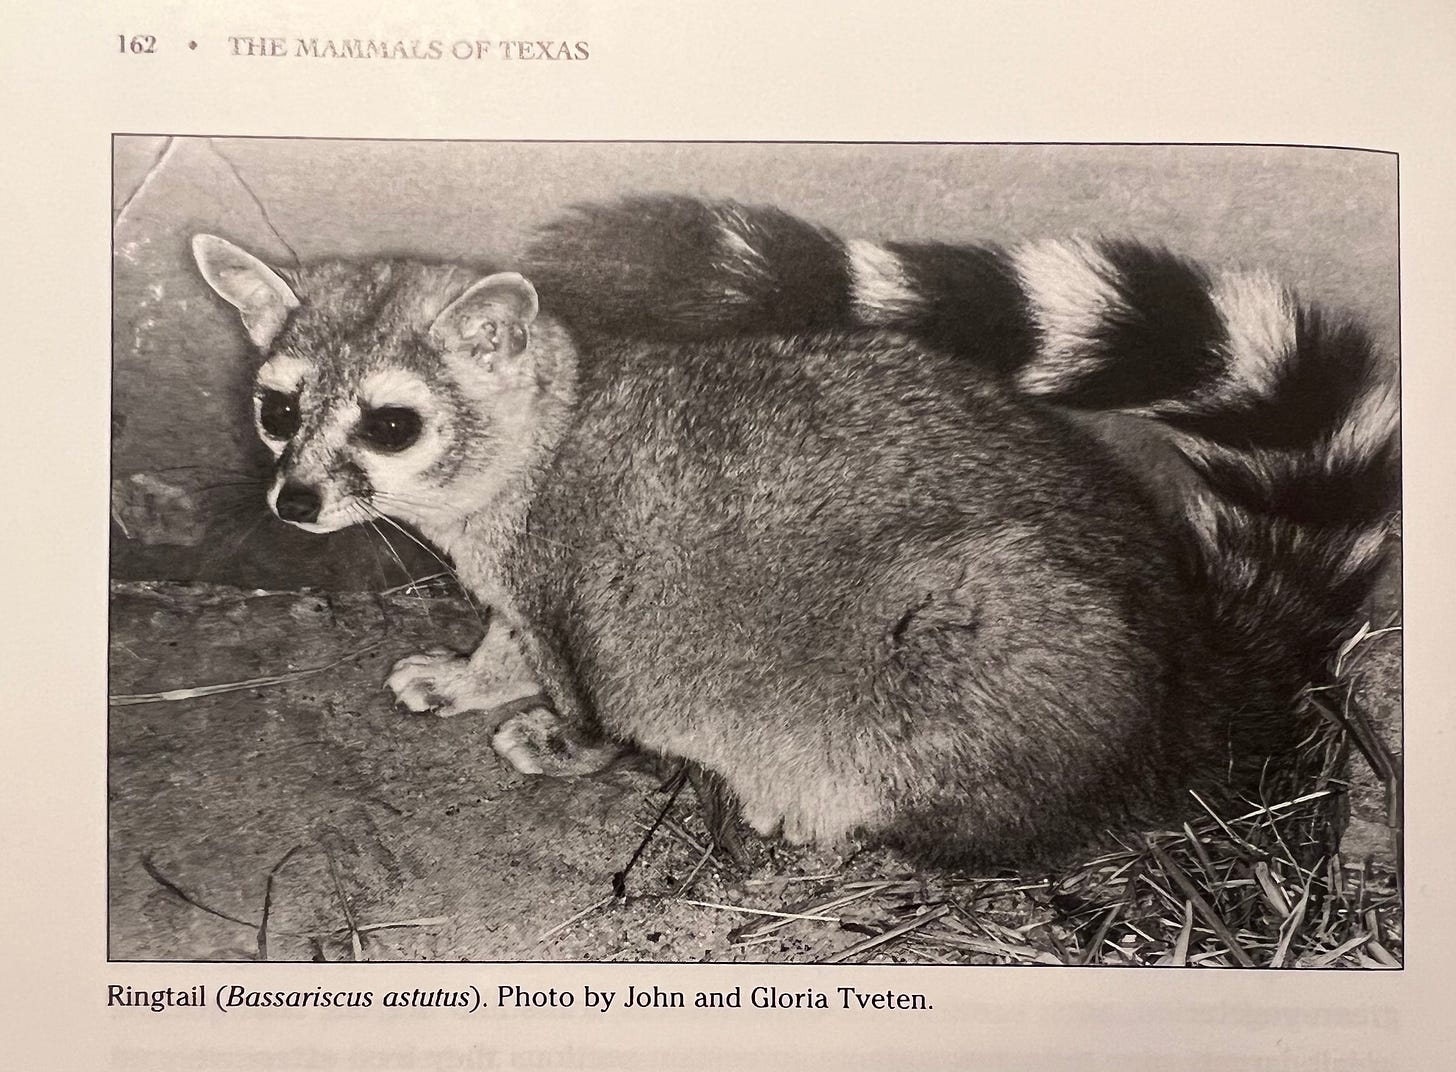 Black and white photo of a ringtail from The Mammals of Texas